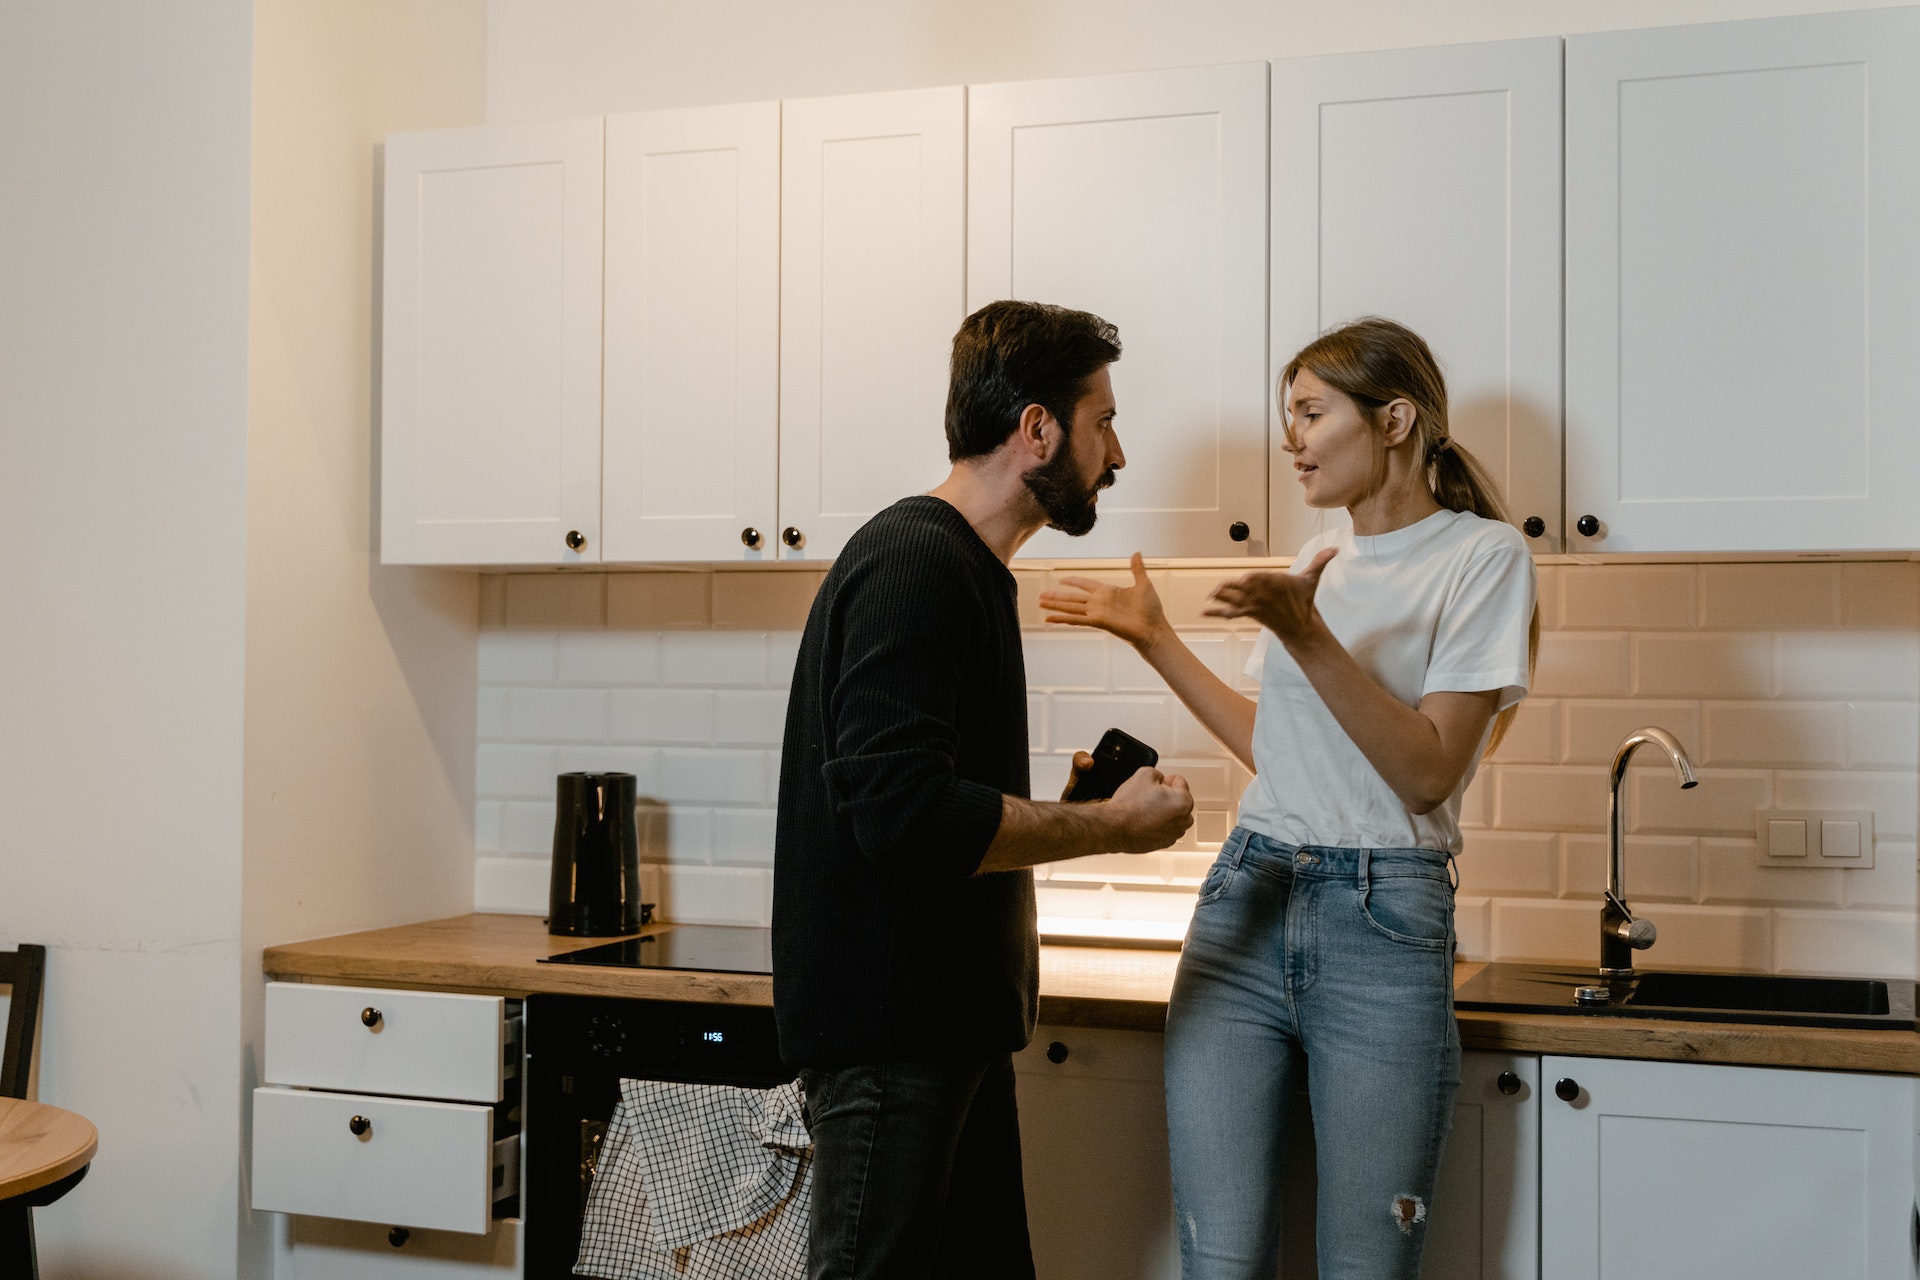 A couple discussing something in the kitchen | Source: Pexels